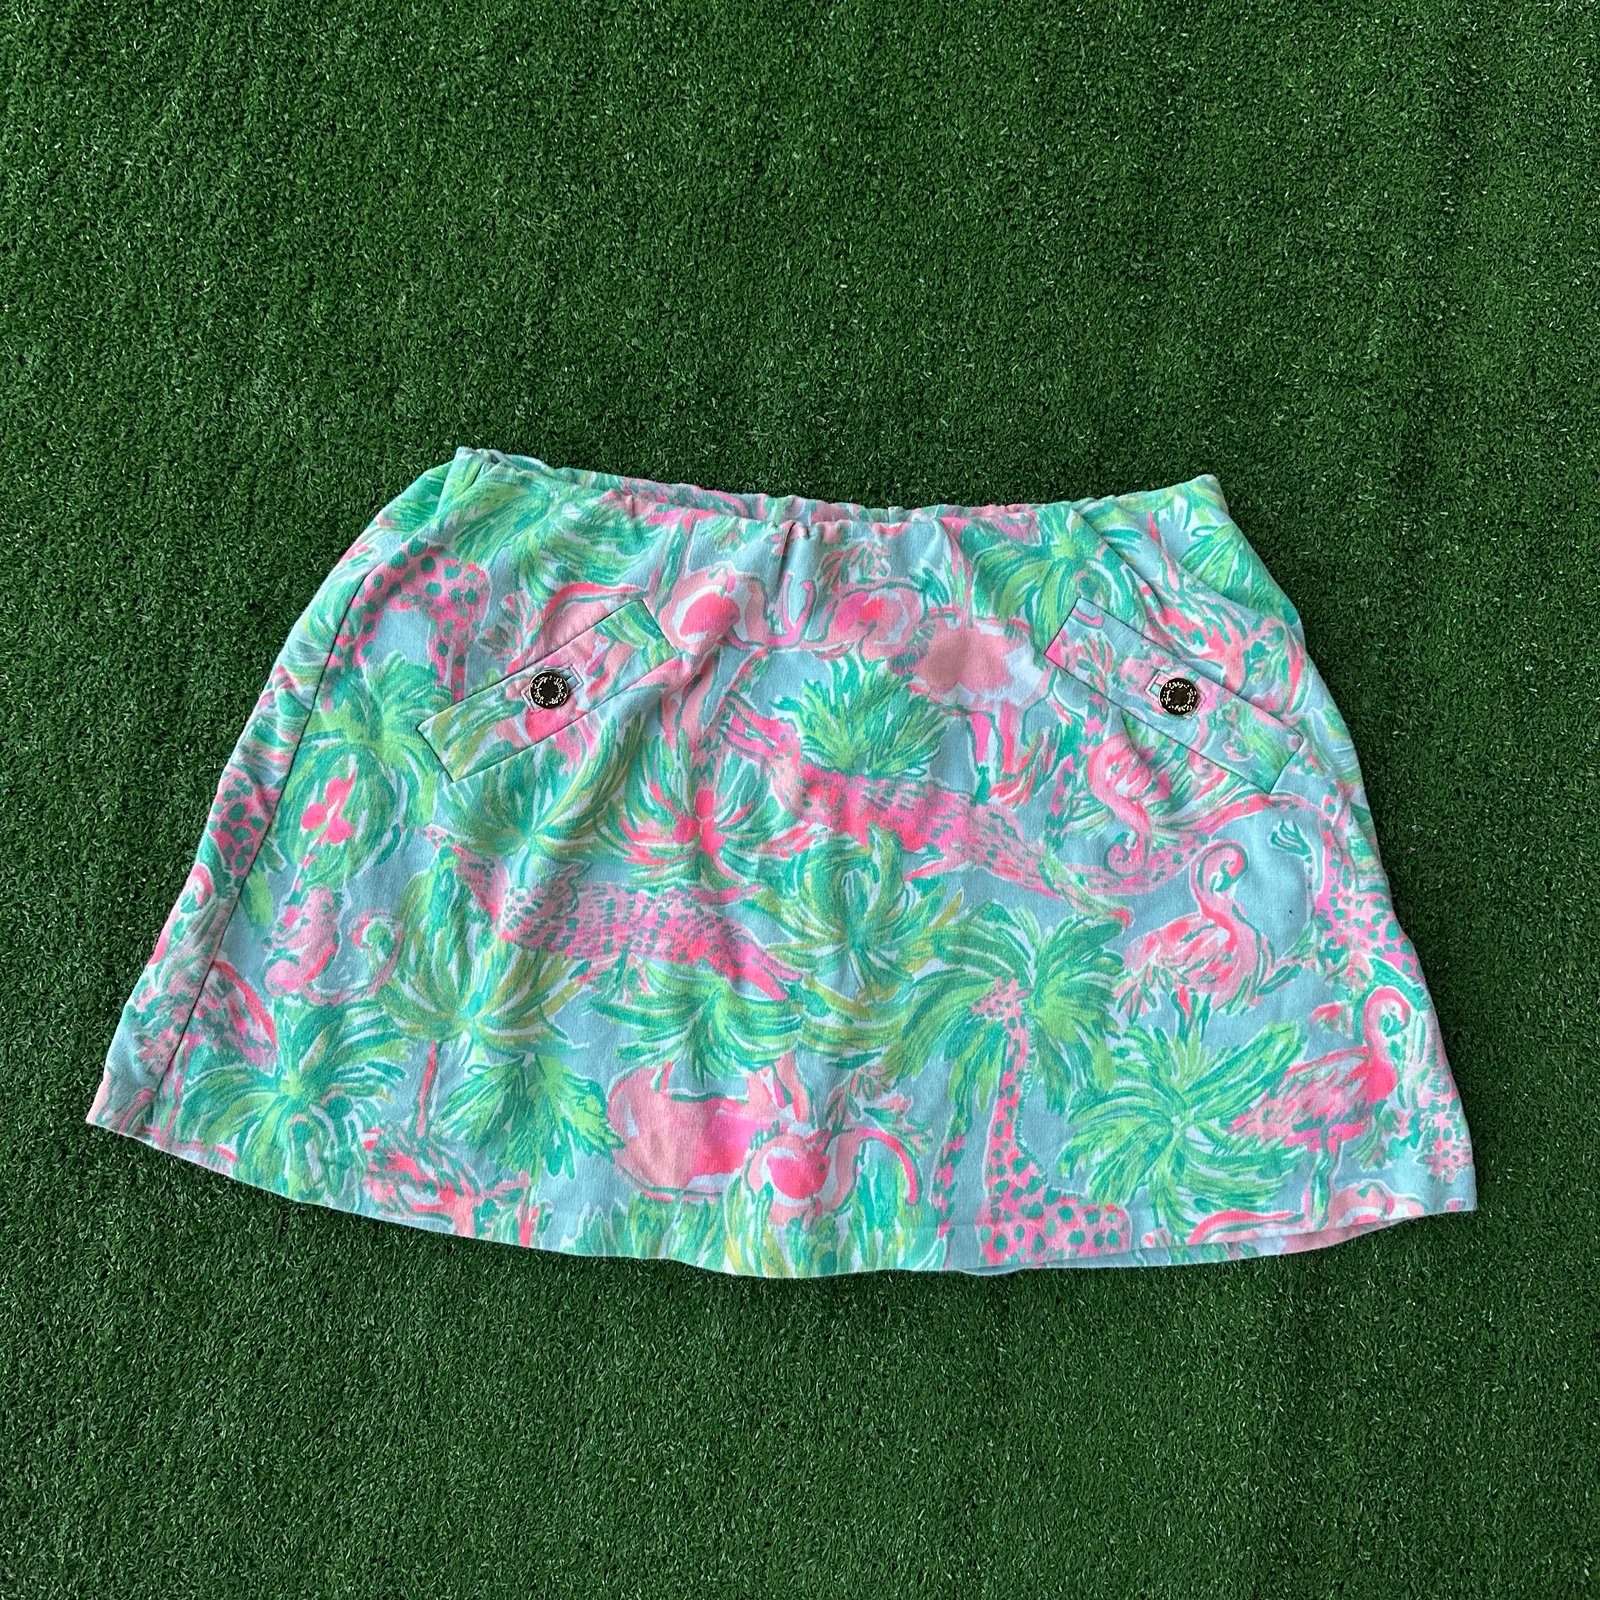 Exclusive lilly pulitzer skirt floral womens skirt size  Medium hEXJrIkPs just buy it